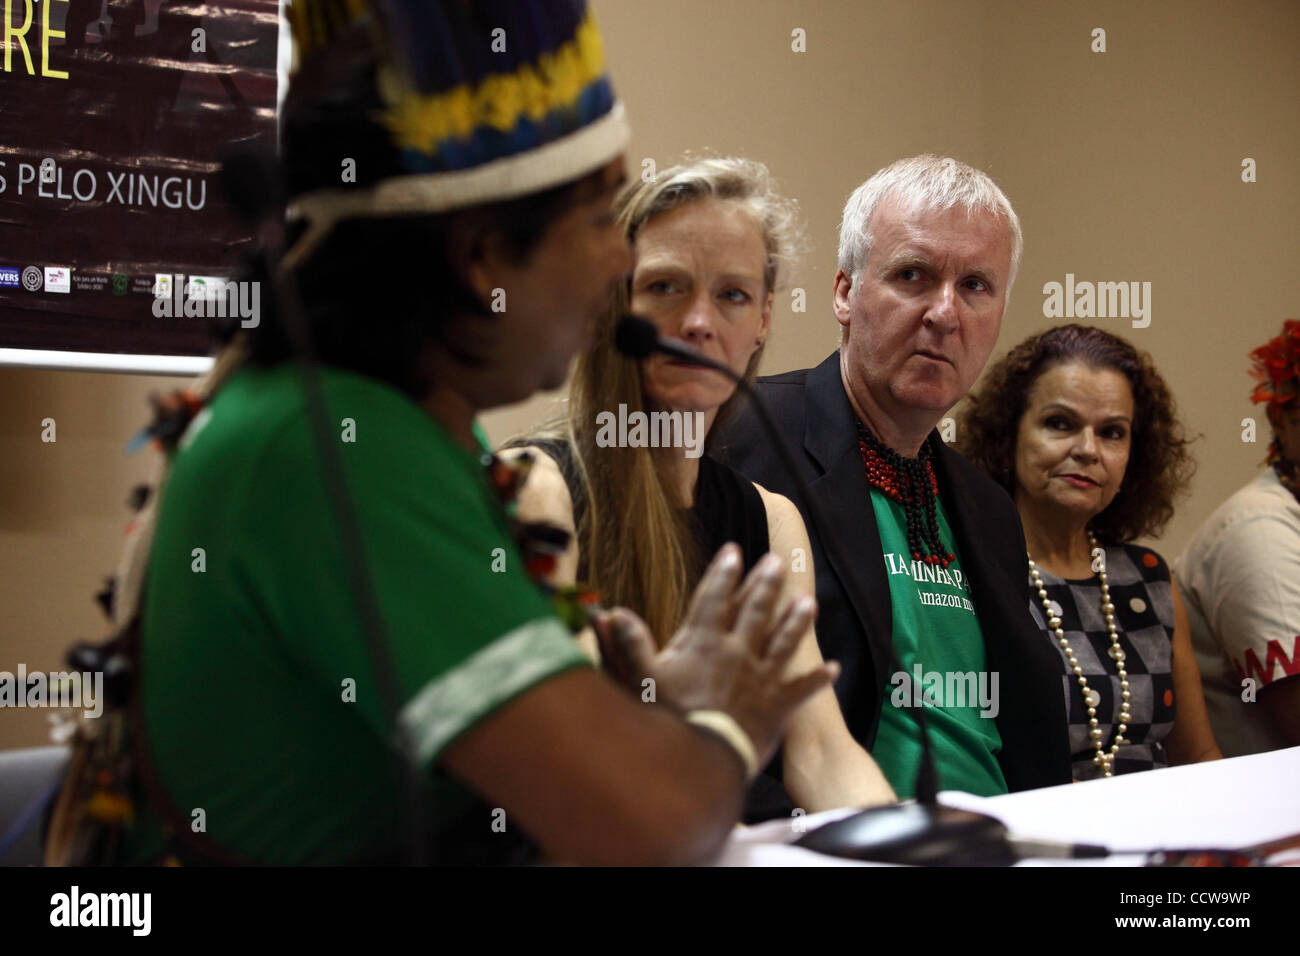 Mar 31, 2010 - Manaus, Brazil - JAMES CAMERON, director of Avatar, with his wife SUZY AMIS holds a press conference on Wednesday, March 31 at 10 am at Hotel Tropical to report on his experience of a three-day visit to the site of the proposed Belo Monte Hydroelectric Dam project in the Big Bend regi Stock Photo